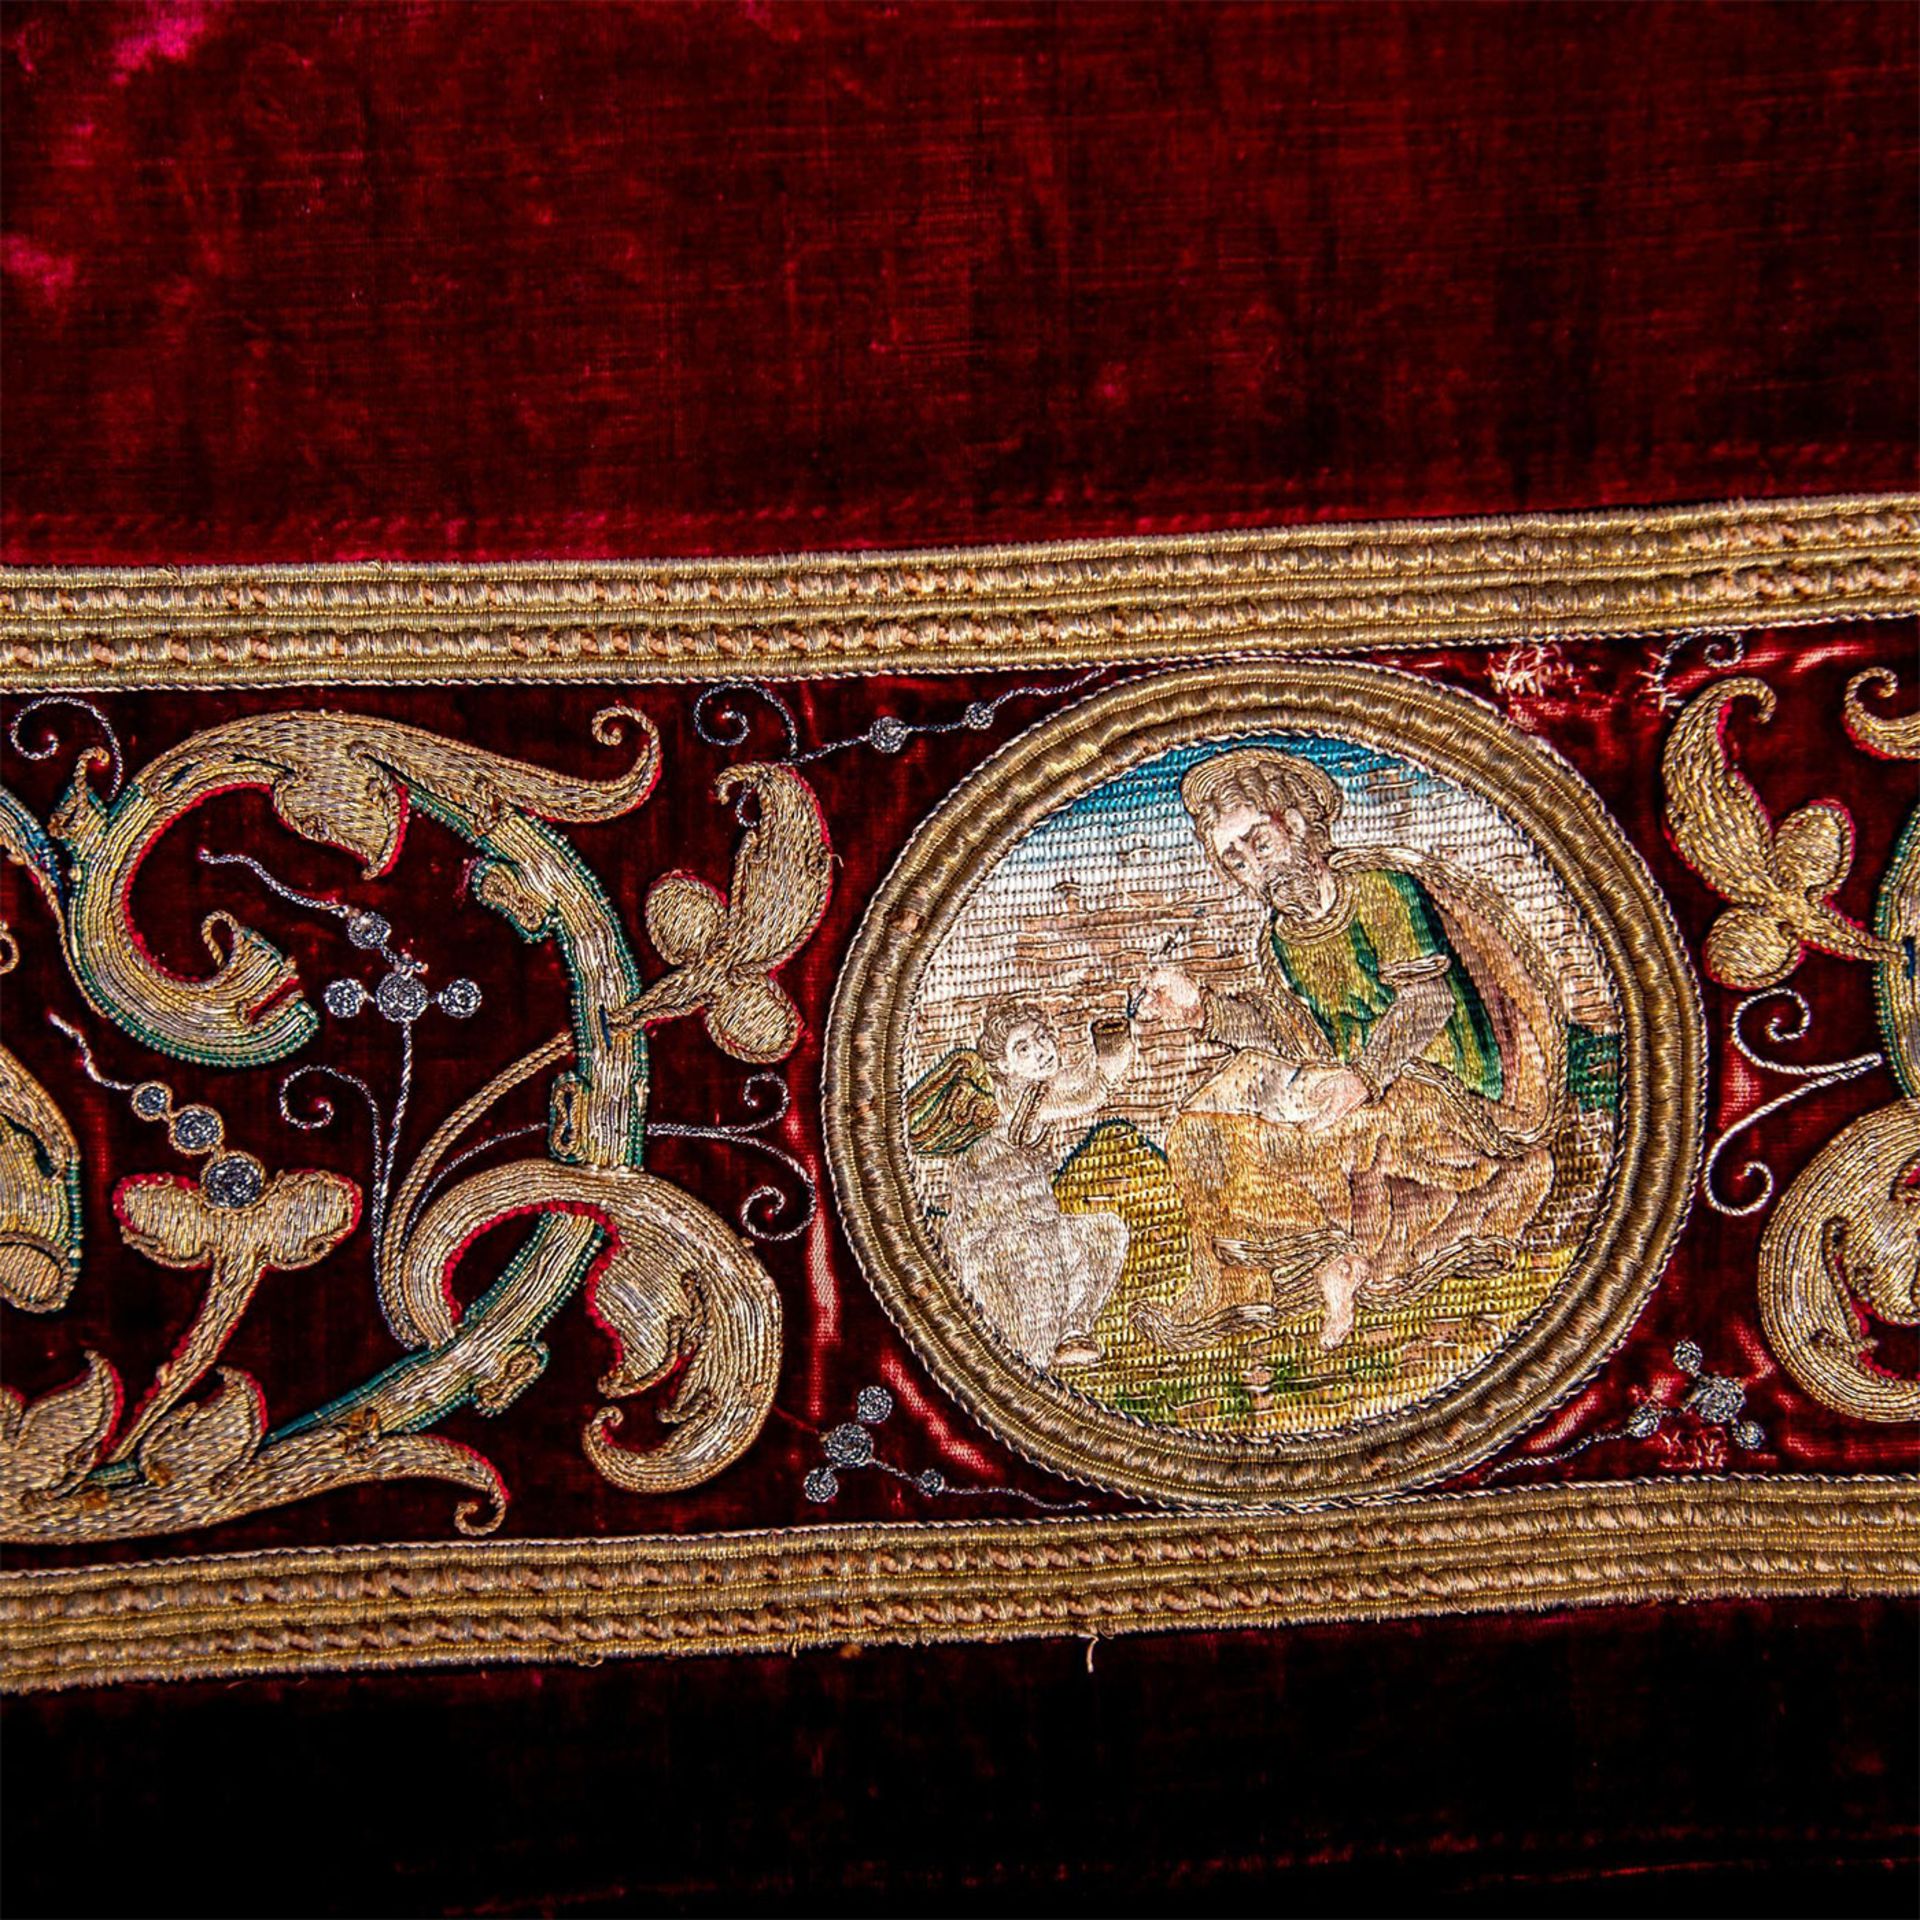 16th Century European Embroidered Wall Hanging - Image 4 of 6